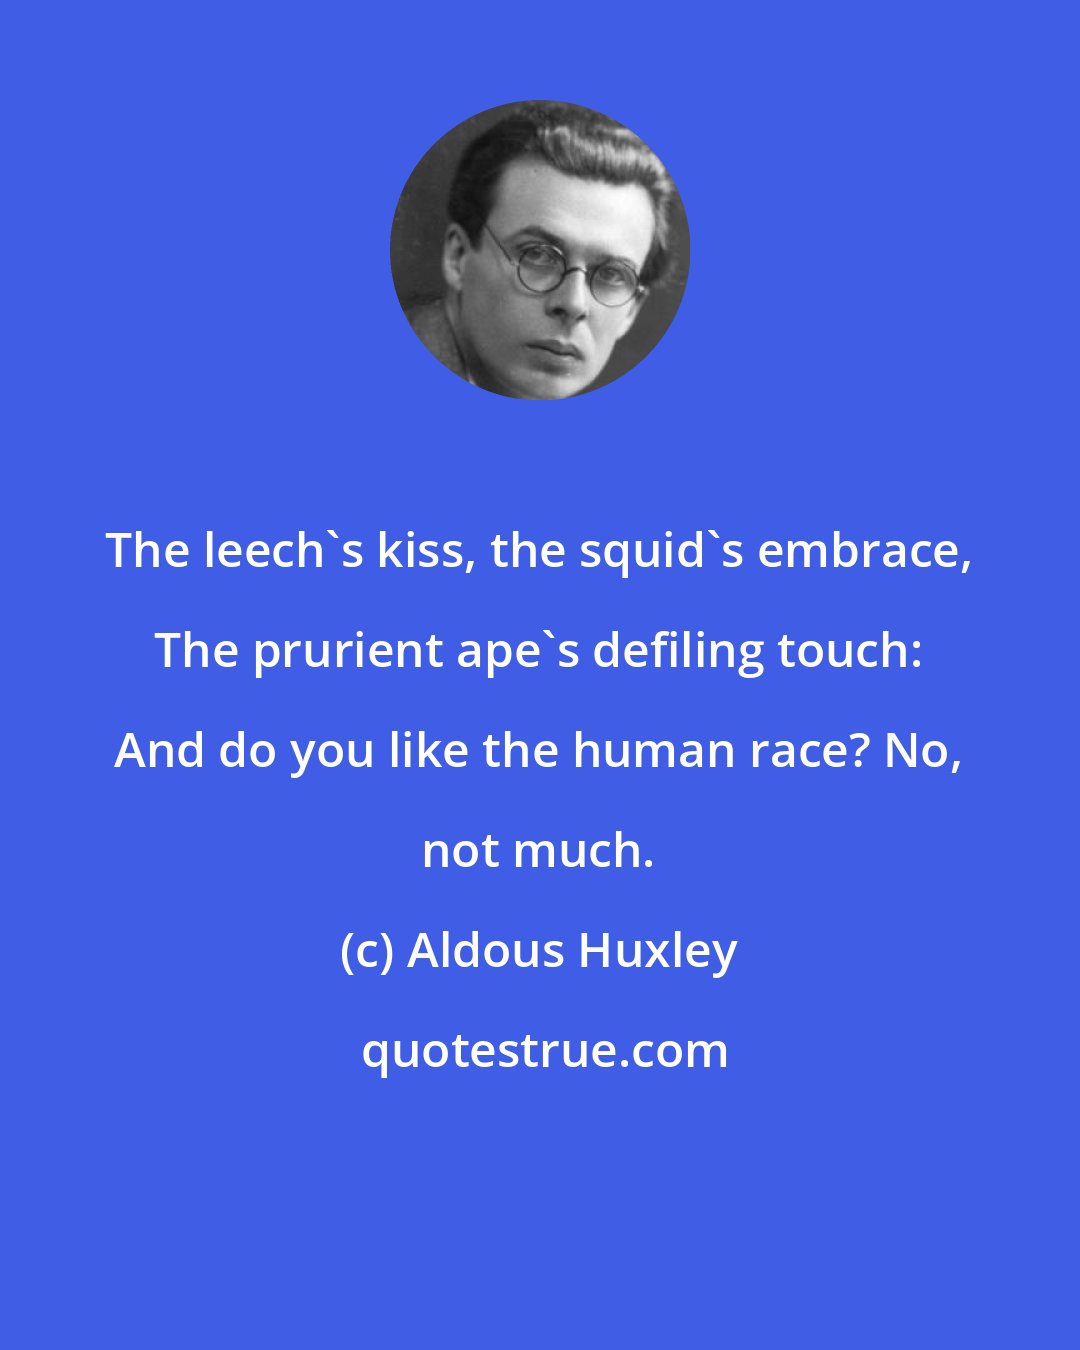 Aldous Huxley: The leech's kiss, the squid's embrace, The prurient ape's defiling touch: And do you like the human race? No, not much.